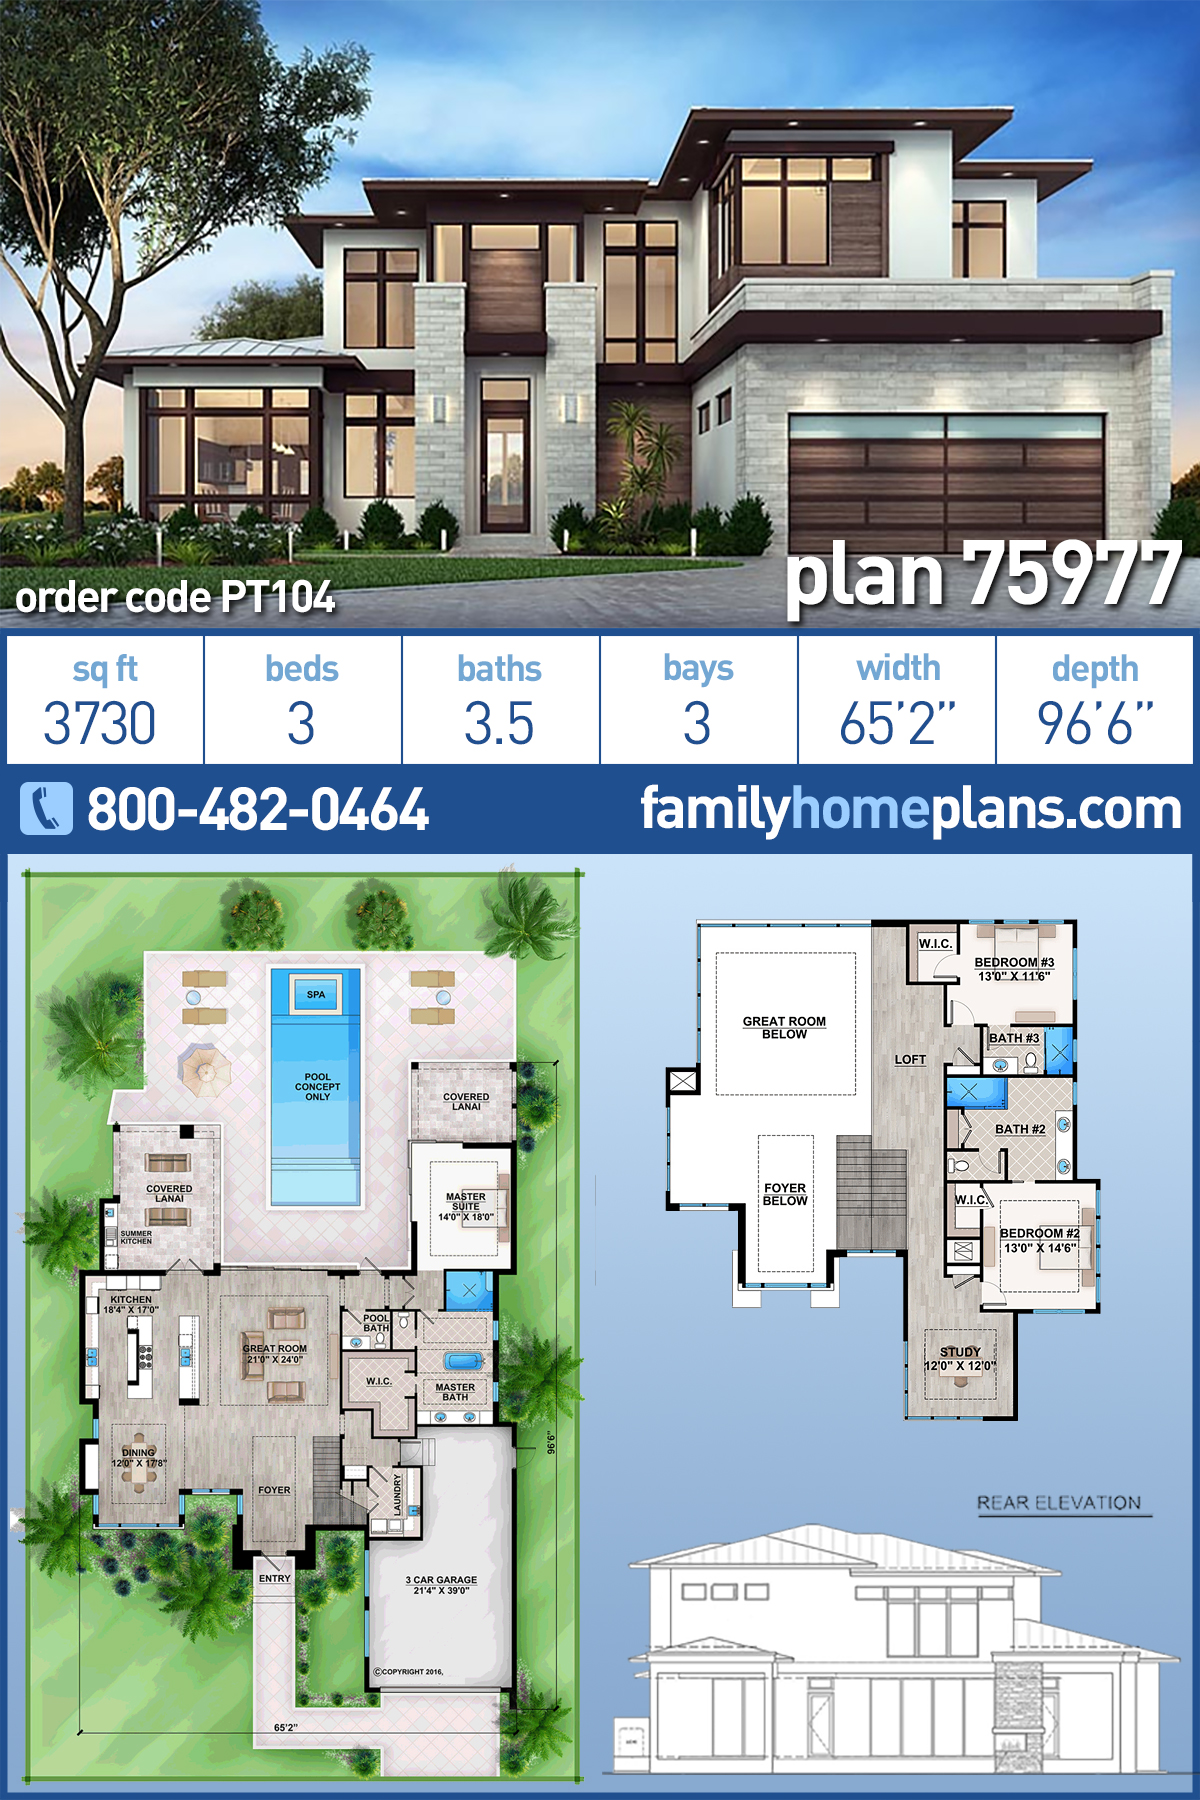 House Plan 75977 Modern Style With 3730 Sq Ft 3 Bed 3 Bath 1